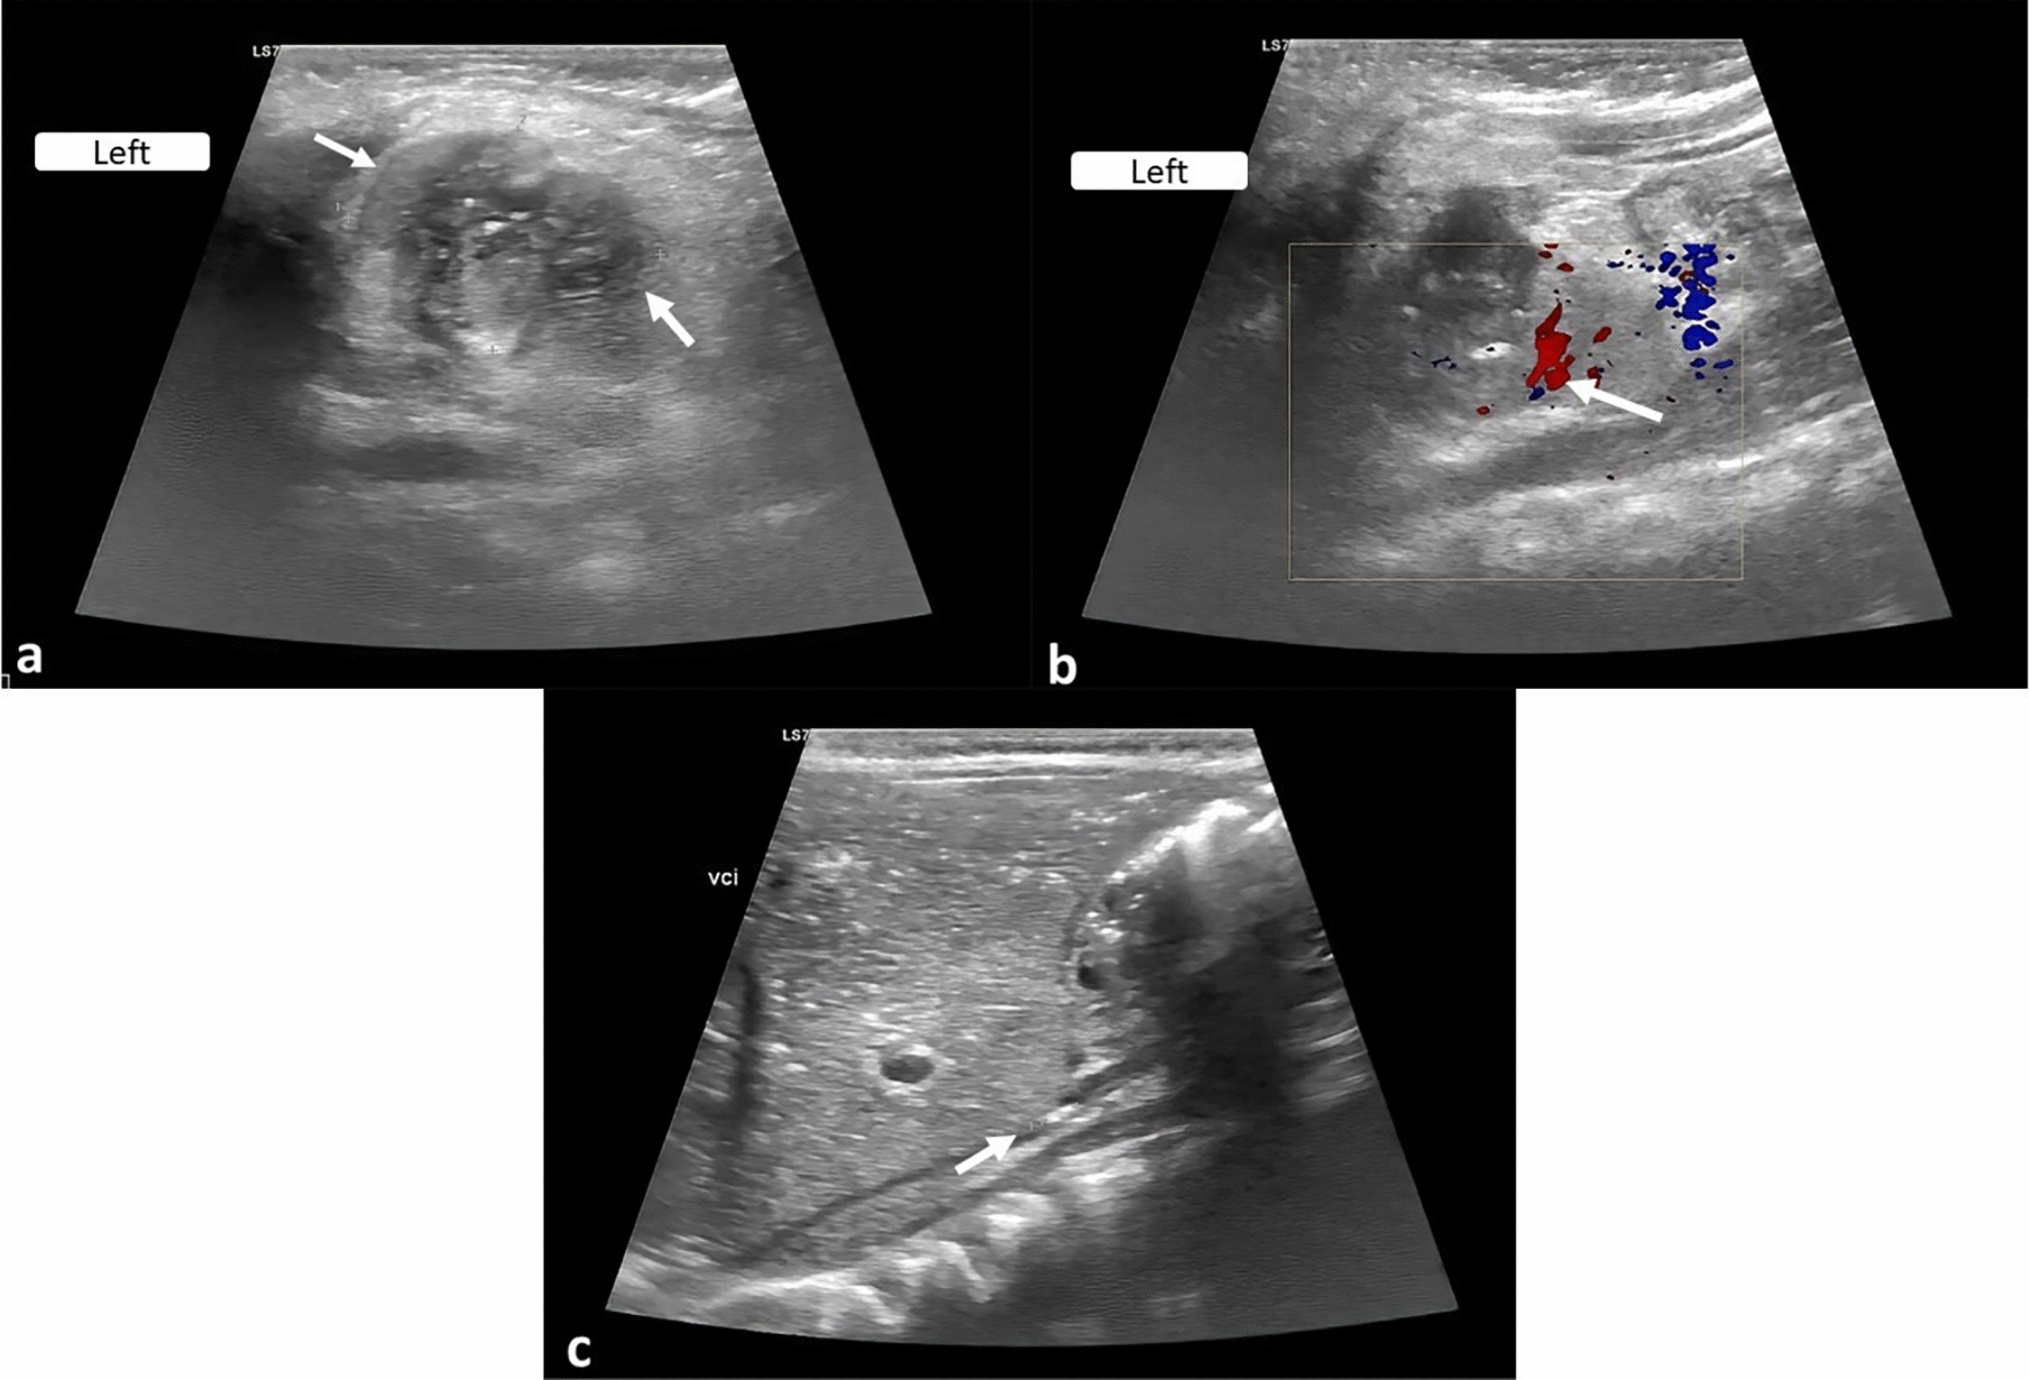 An unusual cause of renal vein thrombosis in a newborn: COVID-19